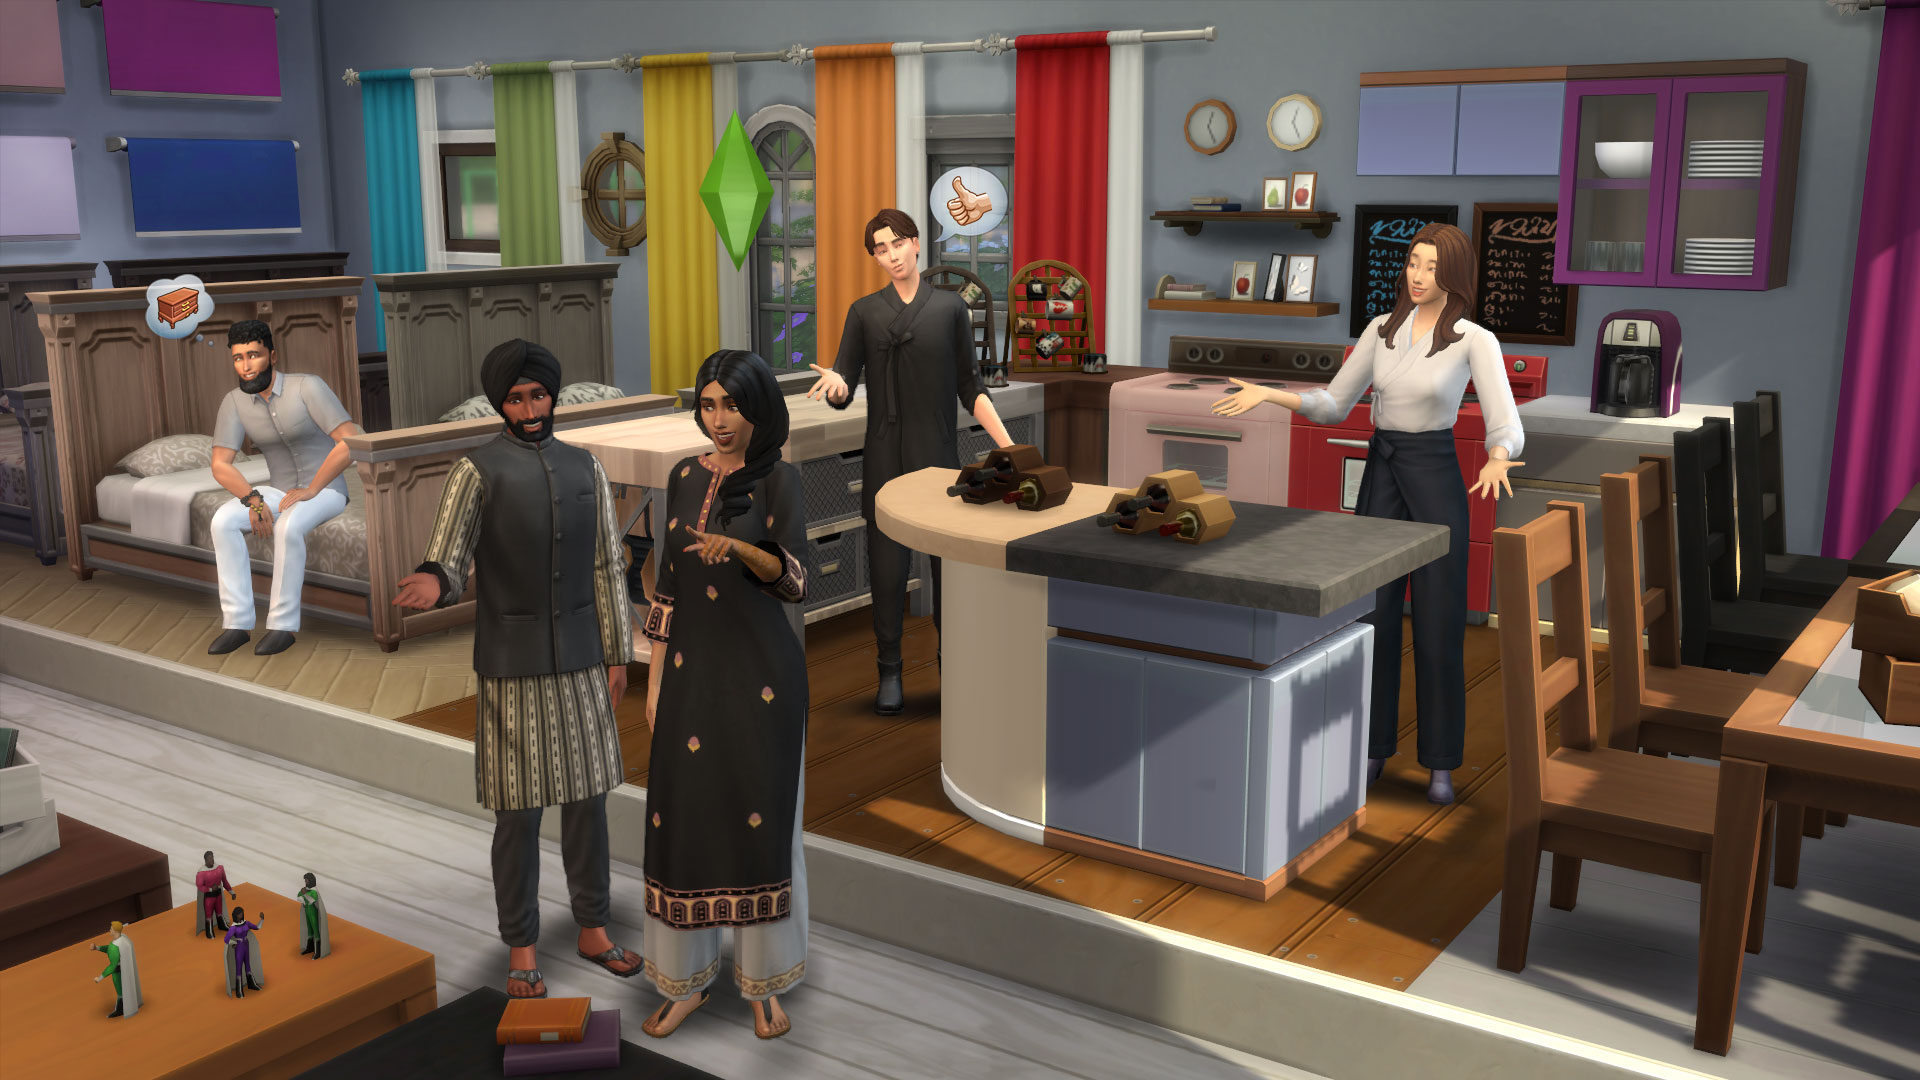 The Sims Games Online – Play Free in Browser 